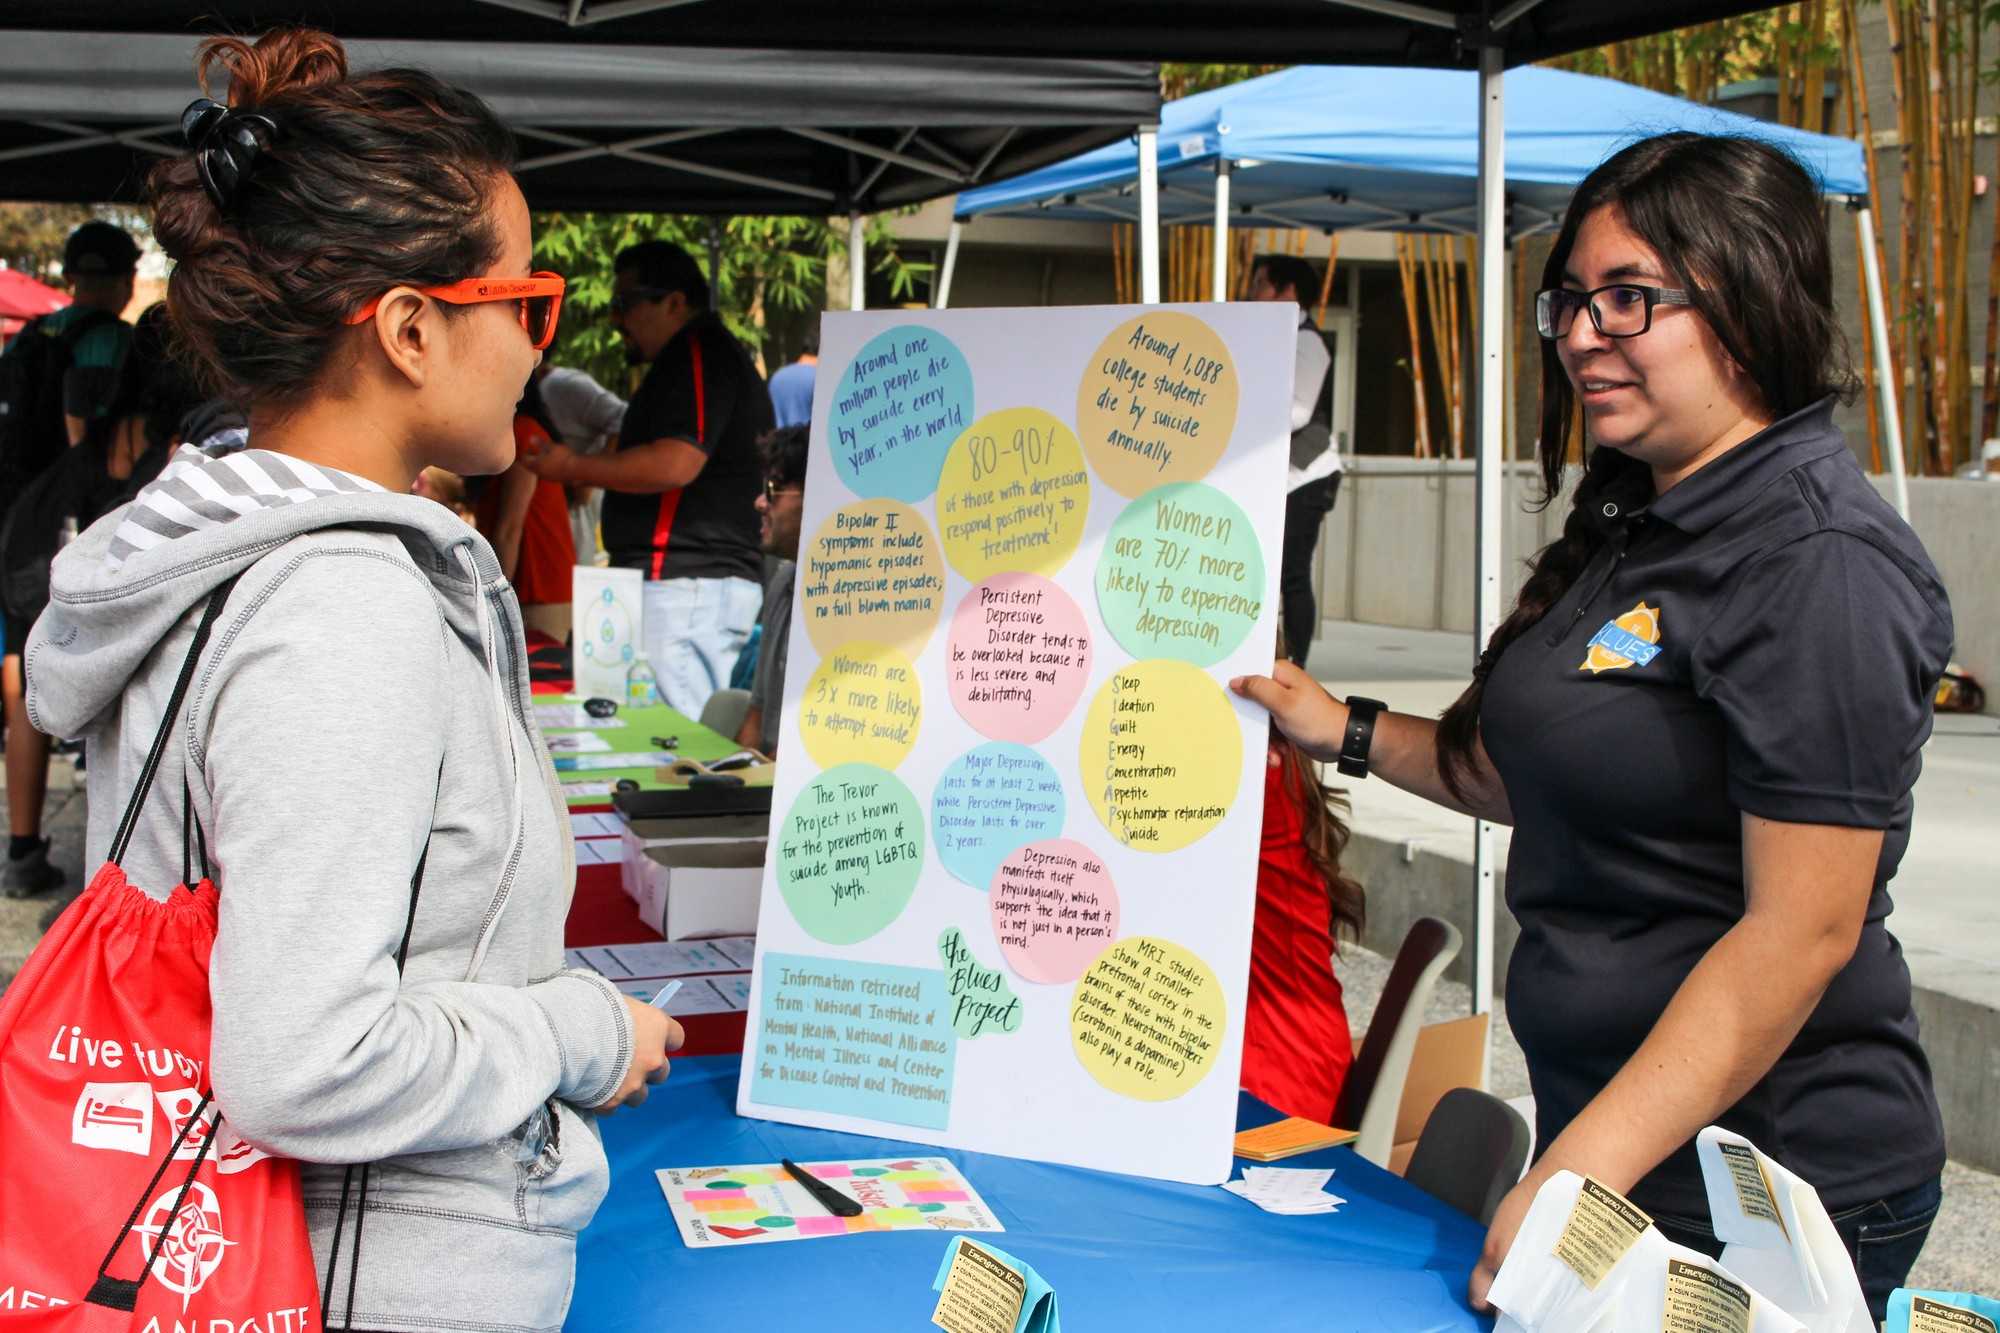 Blues Project member Maria Retiz held a questionnaire about the program in which students participated in order to receive giveaways. (Glory Cruz/ The Sundial)